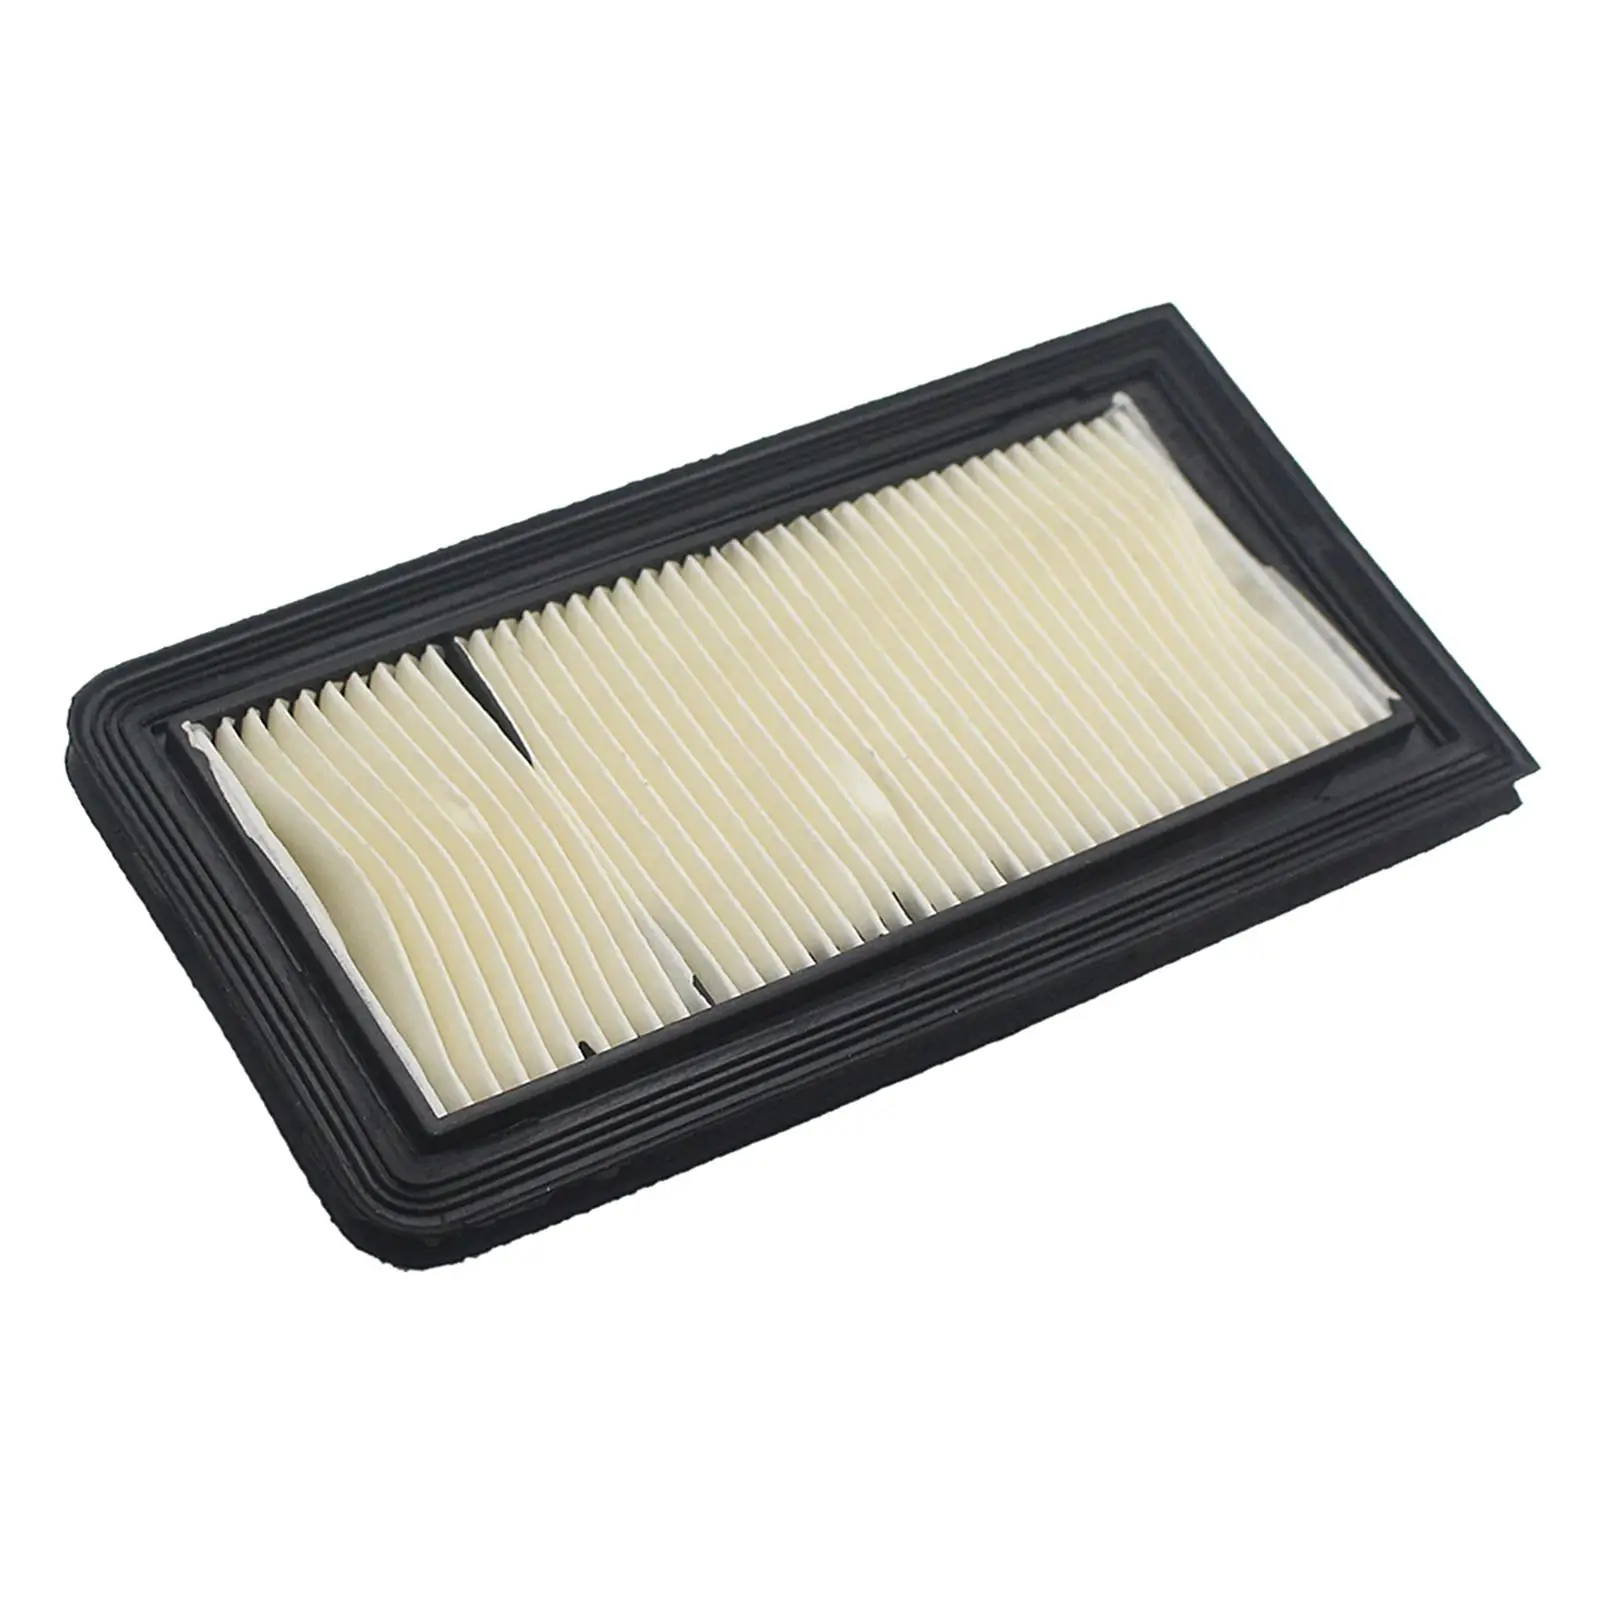  Intake Air Filter Cleaner  Fit for  AN650 SKYWAVE  650 Sky 50  650